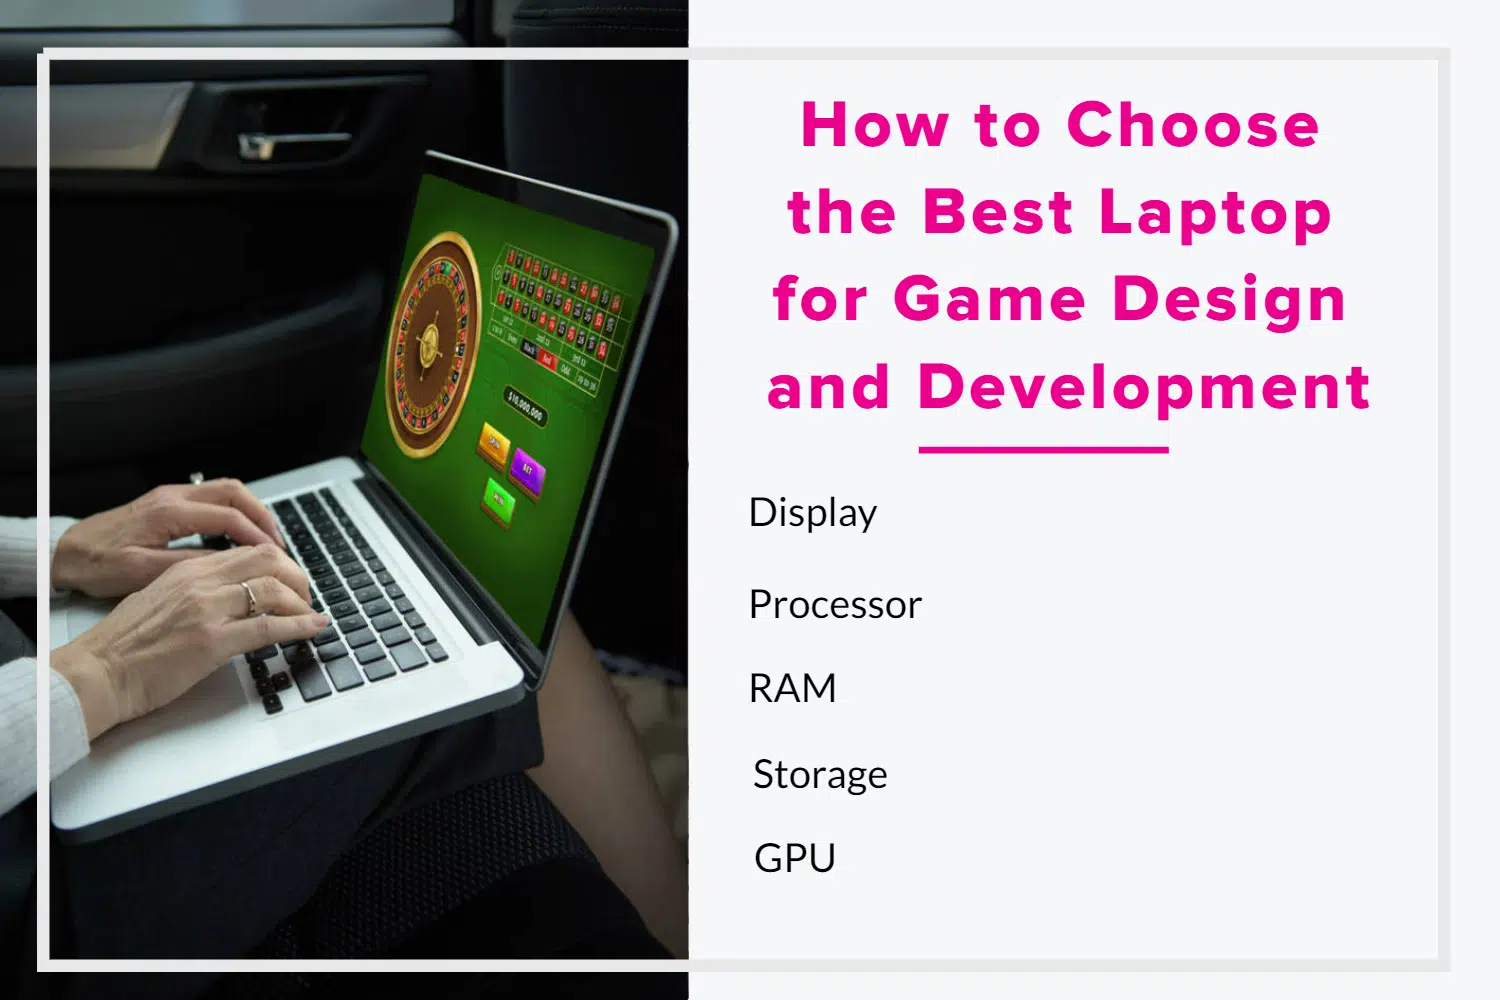 How to Choose the Best Laptop for Game Design and Development